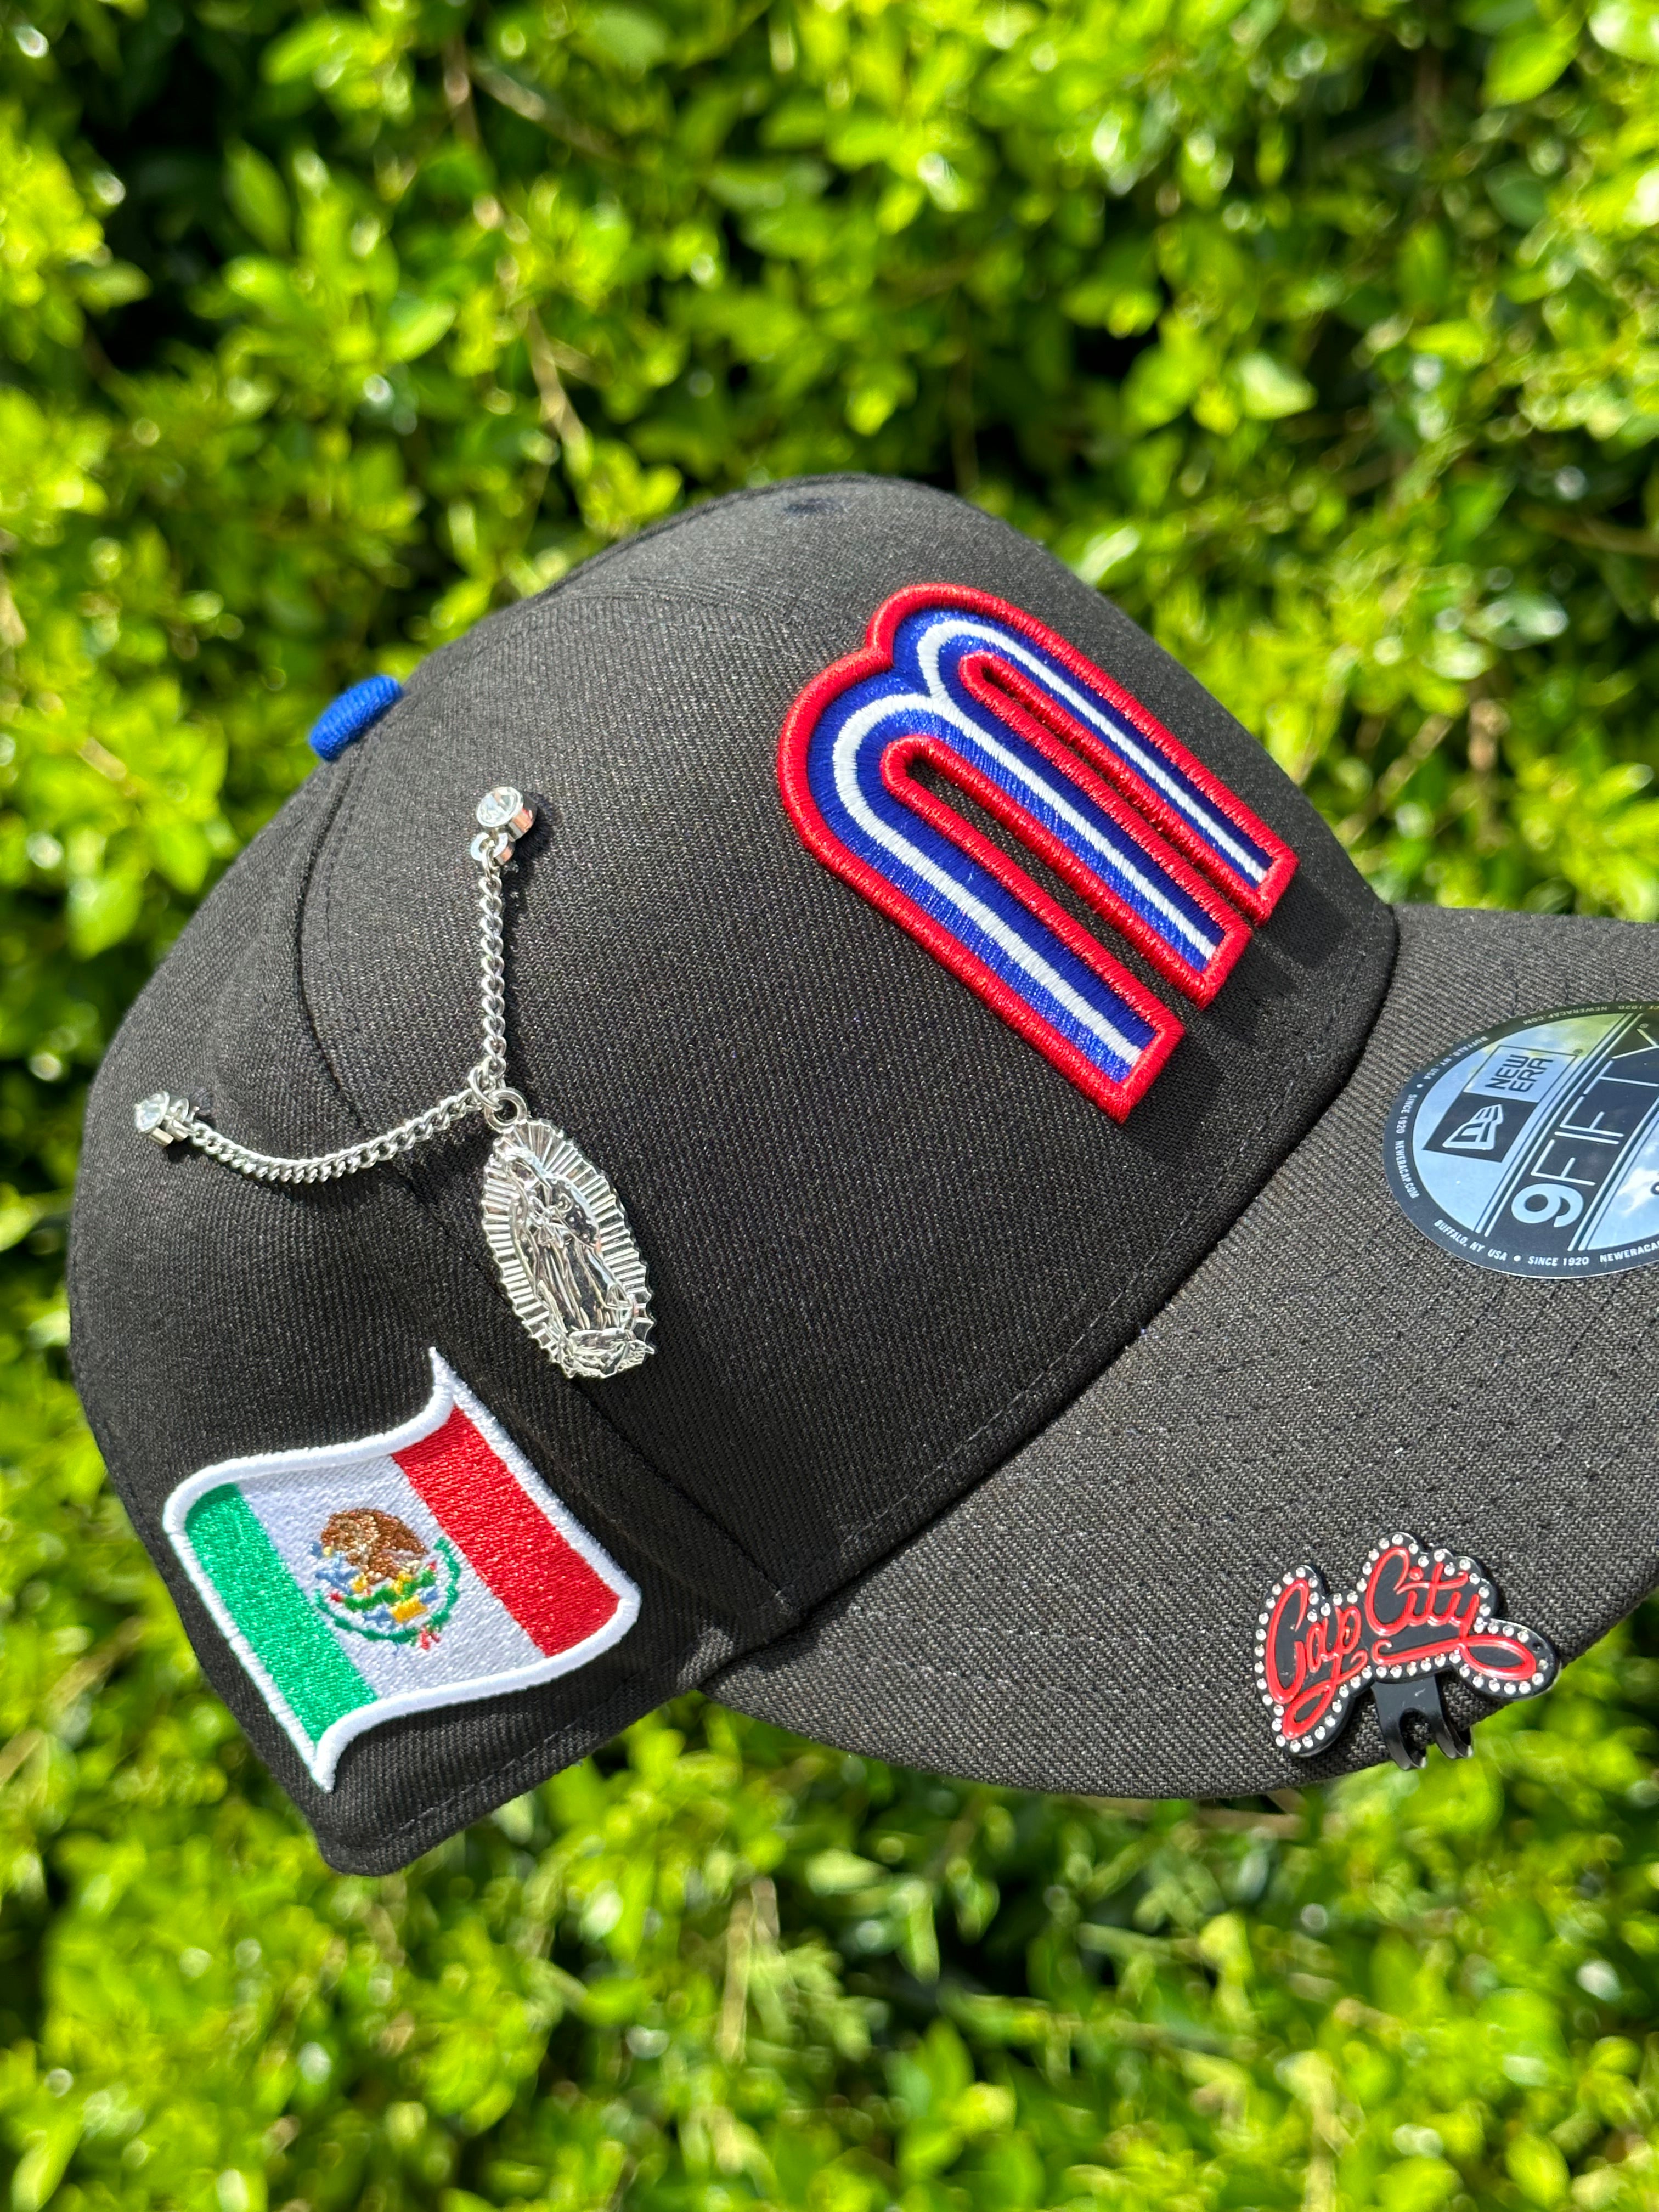 NEW ERA EXCLUSIVE 9FIFTY BLACK MEXICO SNAPBACK W/ MEXICO FLAG SIDE PATCH